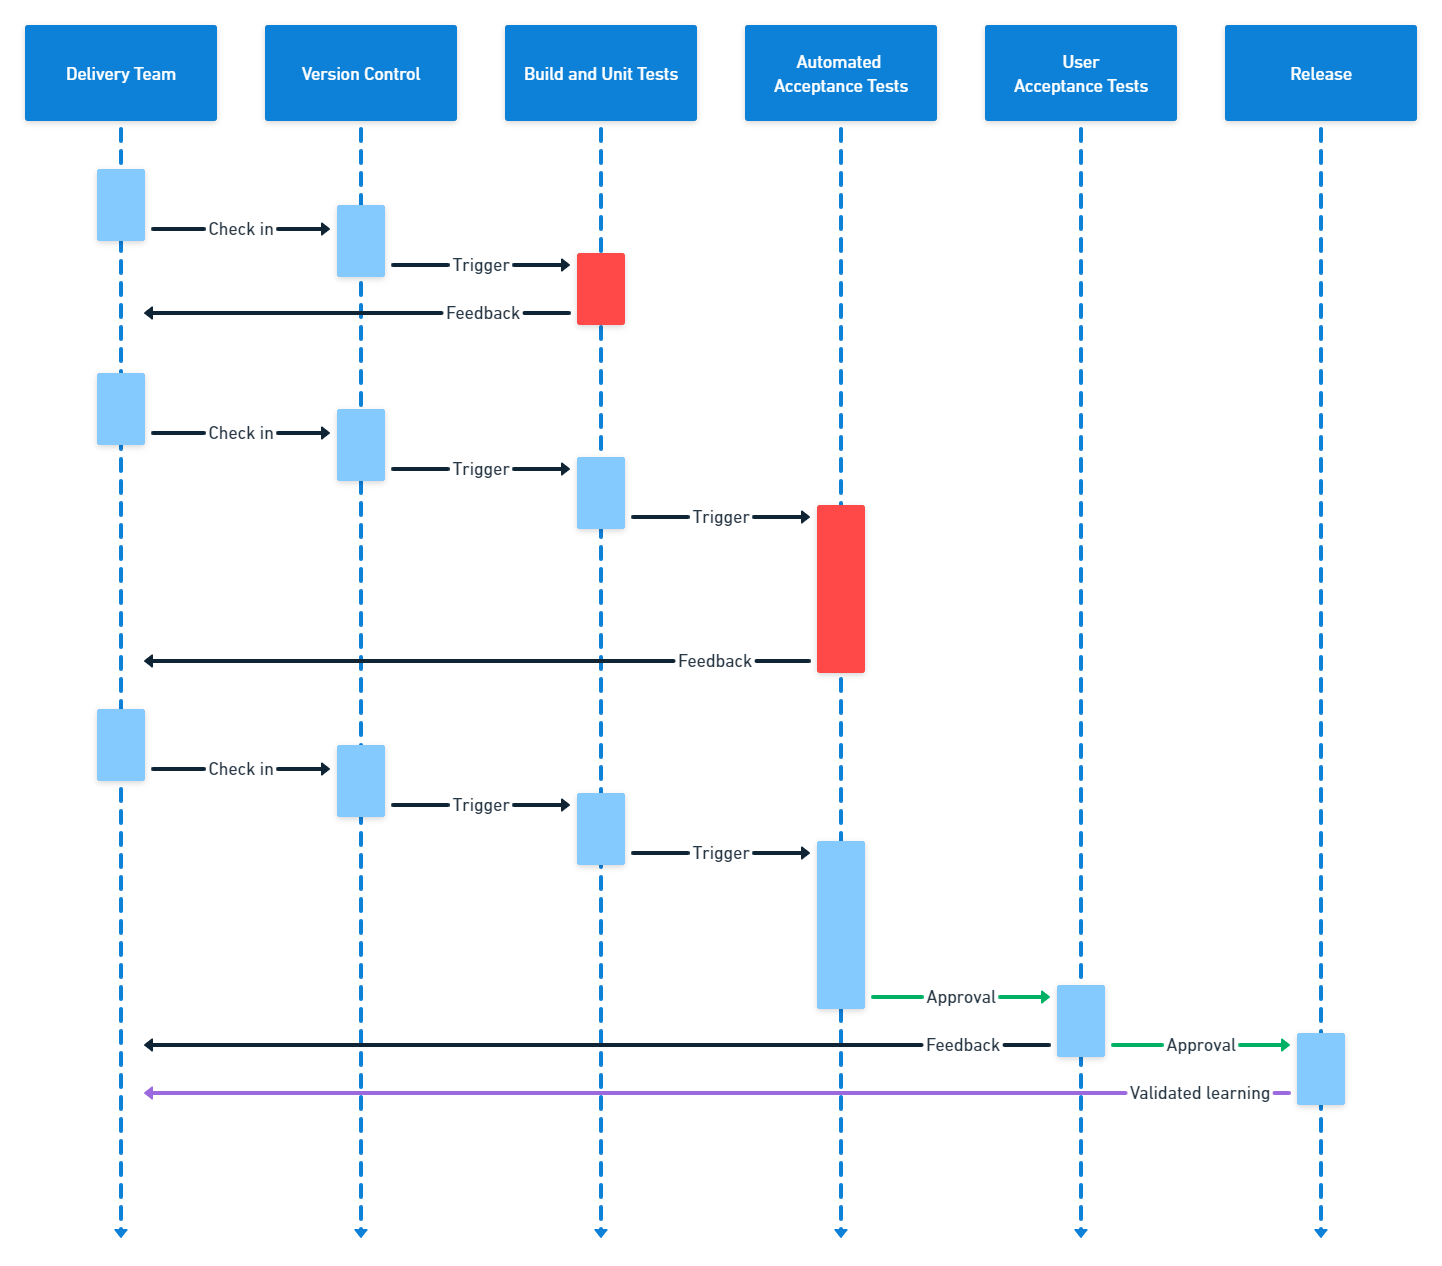 Sequence diagram showing feedback from different stages of the deployment pipeline